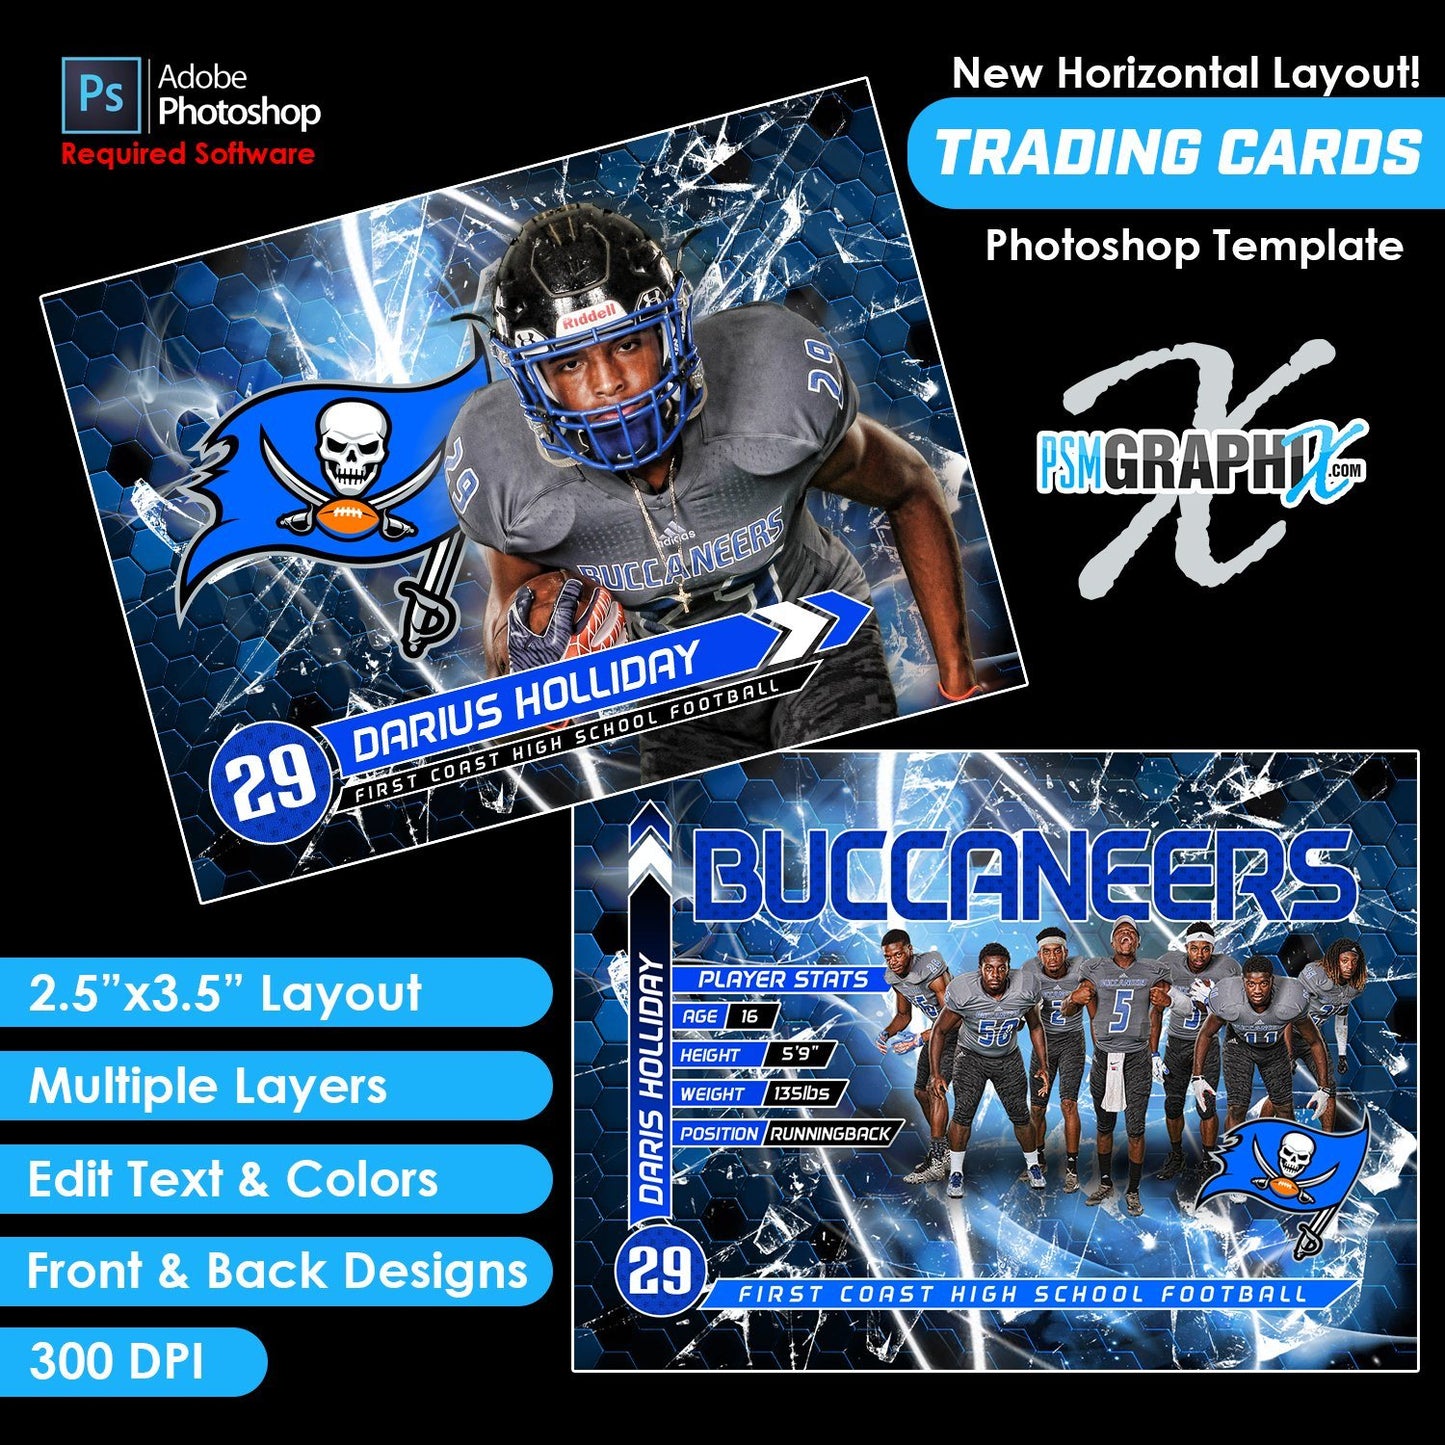 Honeycomb - V3 - Game Day Trading Card Template-Photoshop Template - PSMGraphix